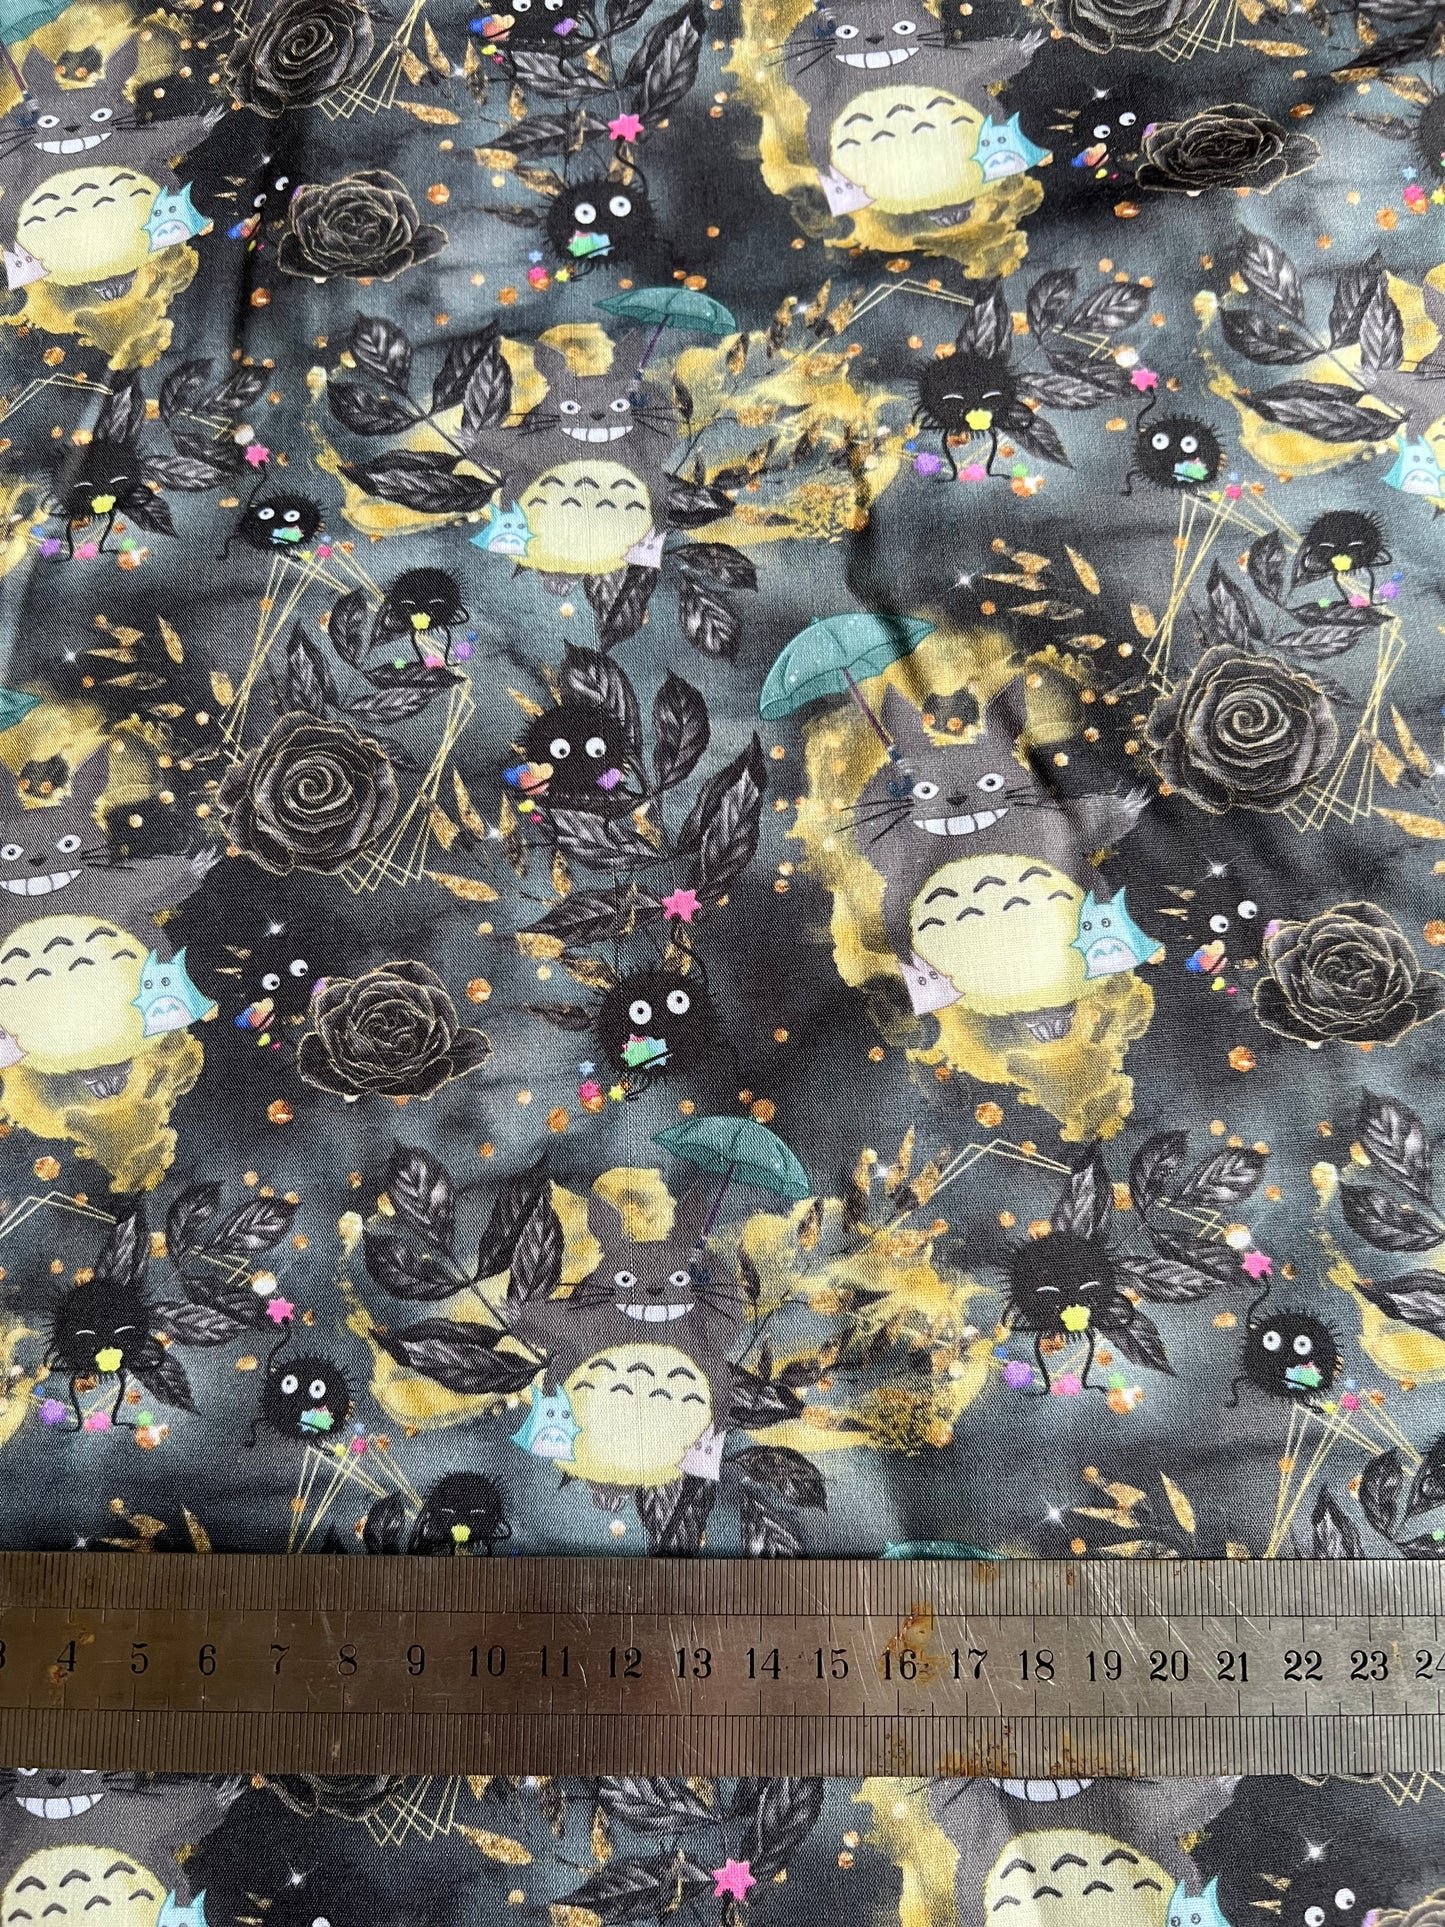 TOTORO - Polycotton Fabric from Japan